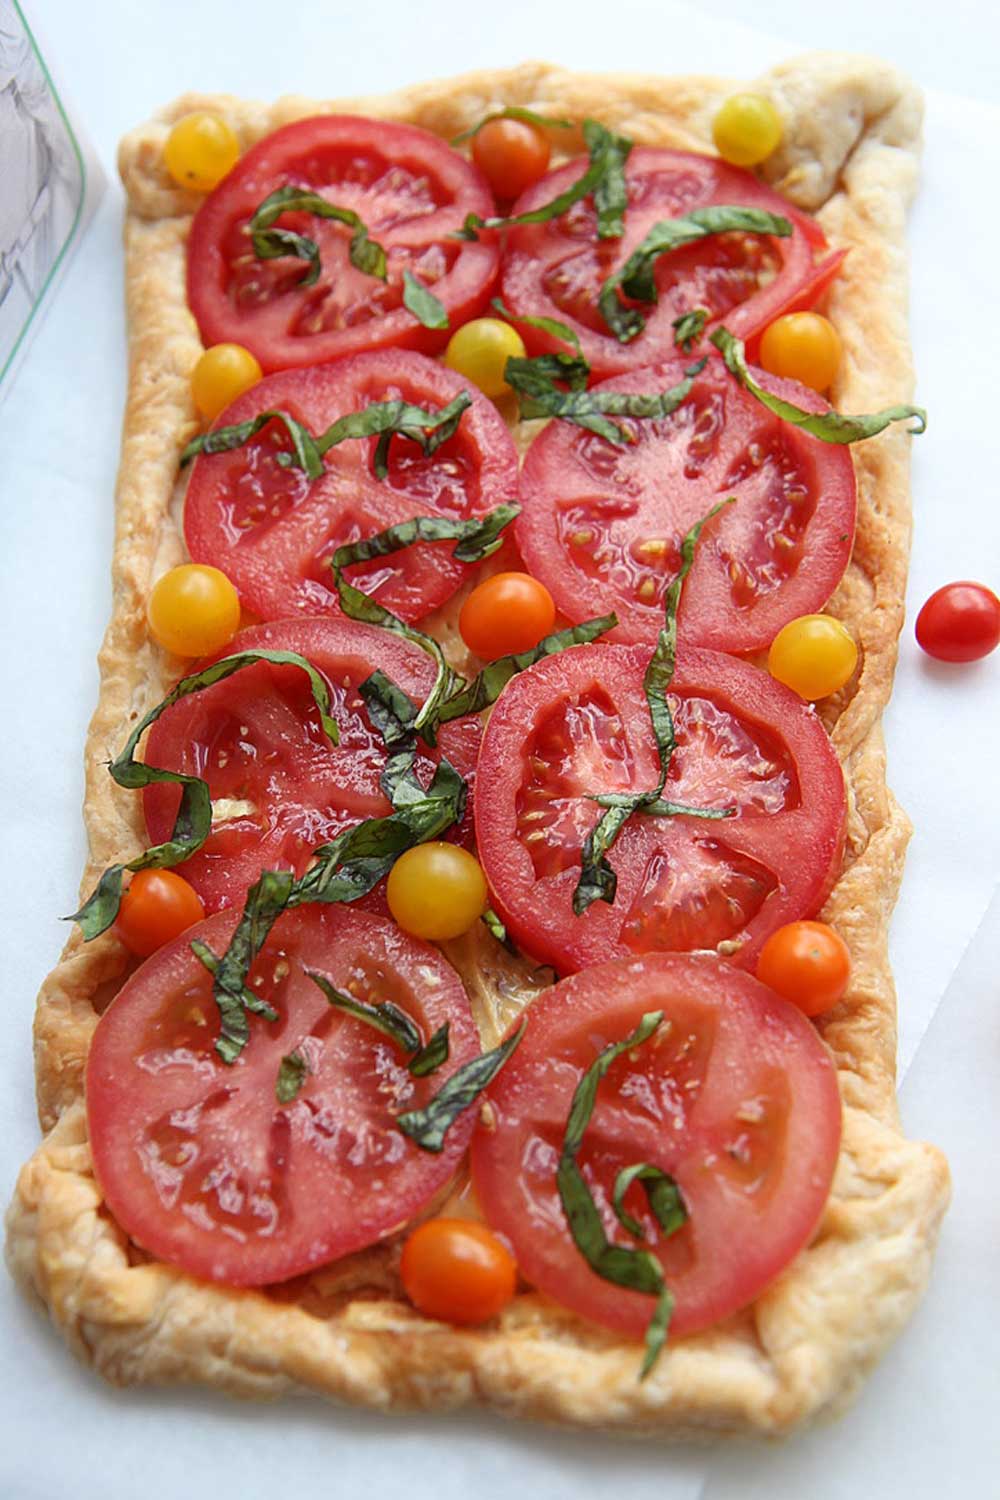 4 Ingredient Puff Pastry Tomato Tart Recipe. This is an easy summer dinner recipe or 4 ingredient appetizer. Happy Cooking! www.ChopHappy.com #tomtorecipes #summerrecipes